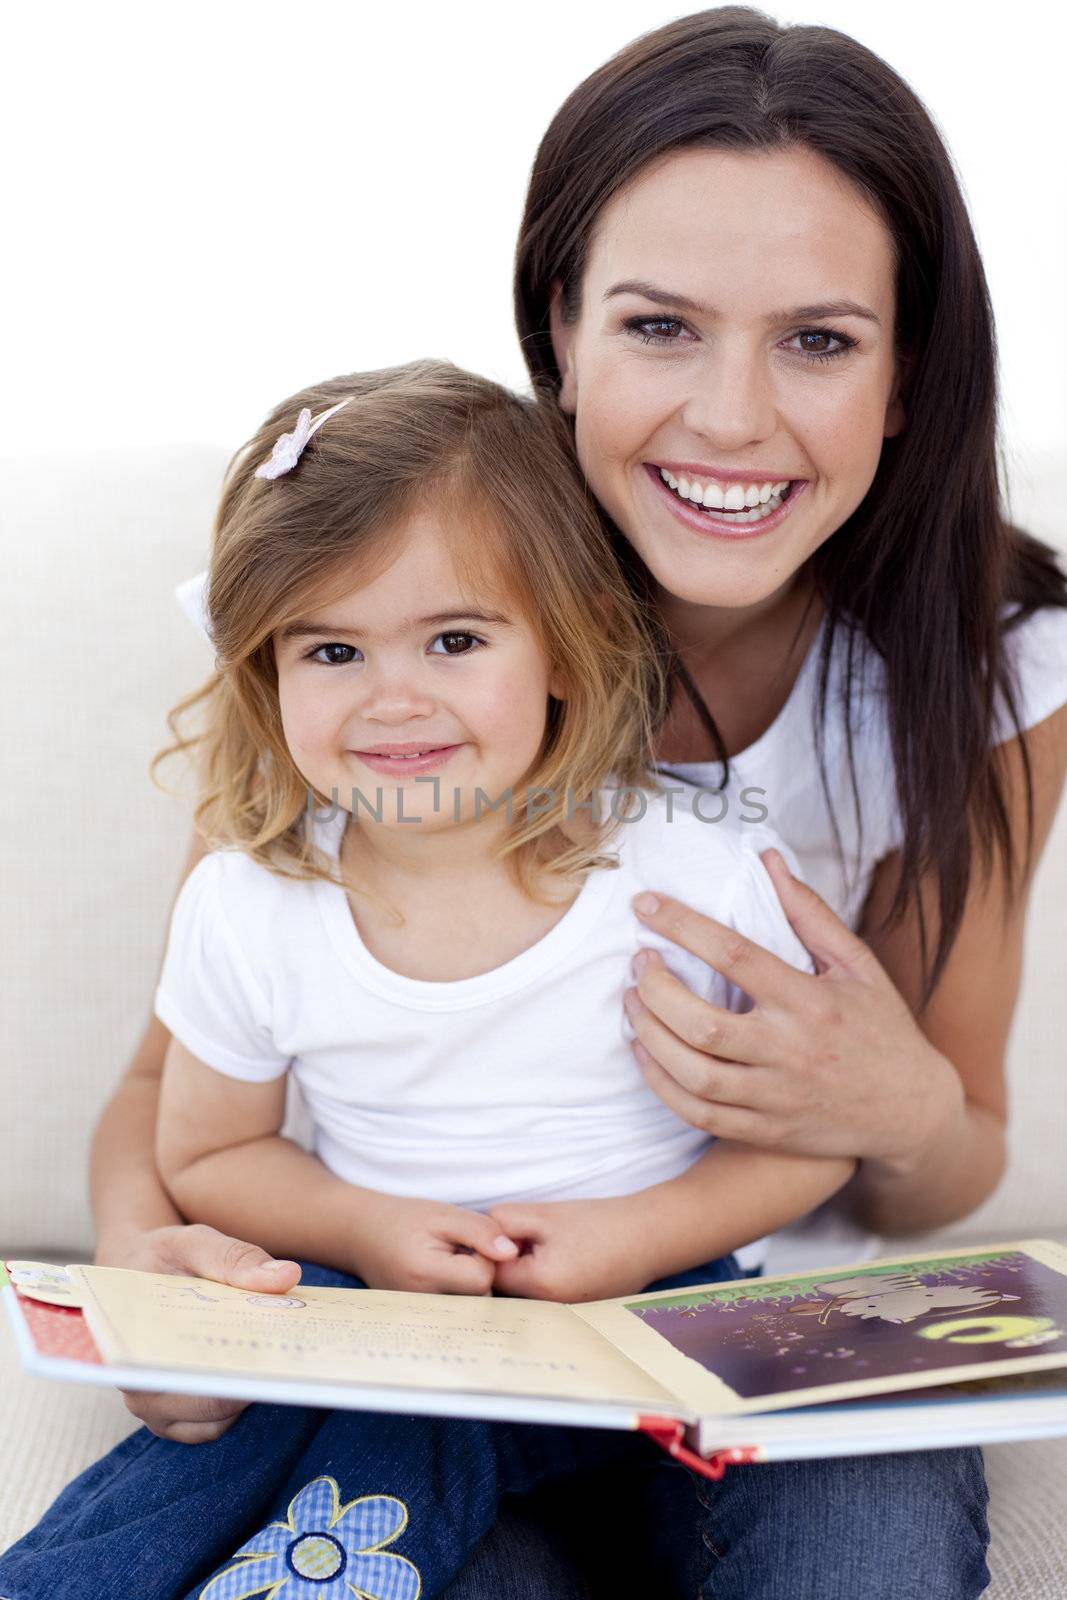 Smiling mother and daughter reading a book in living-room